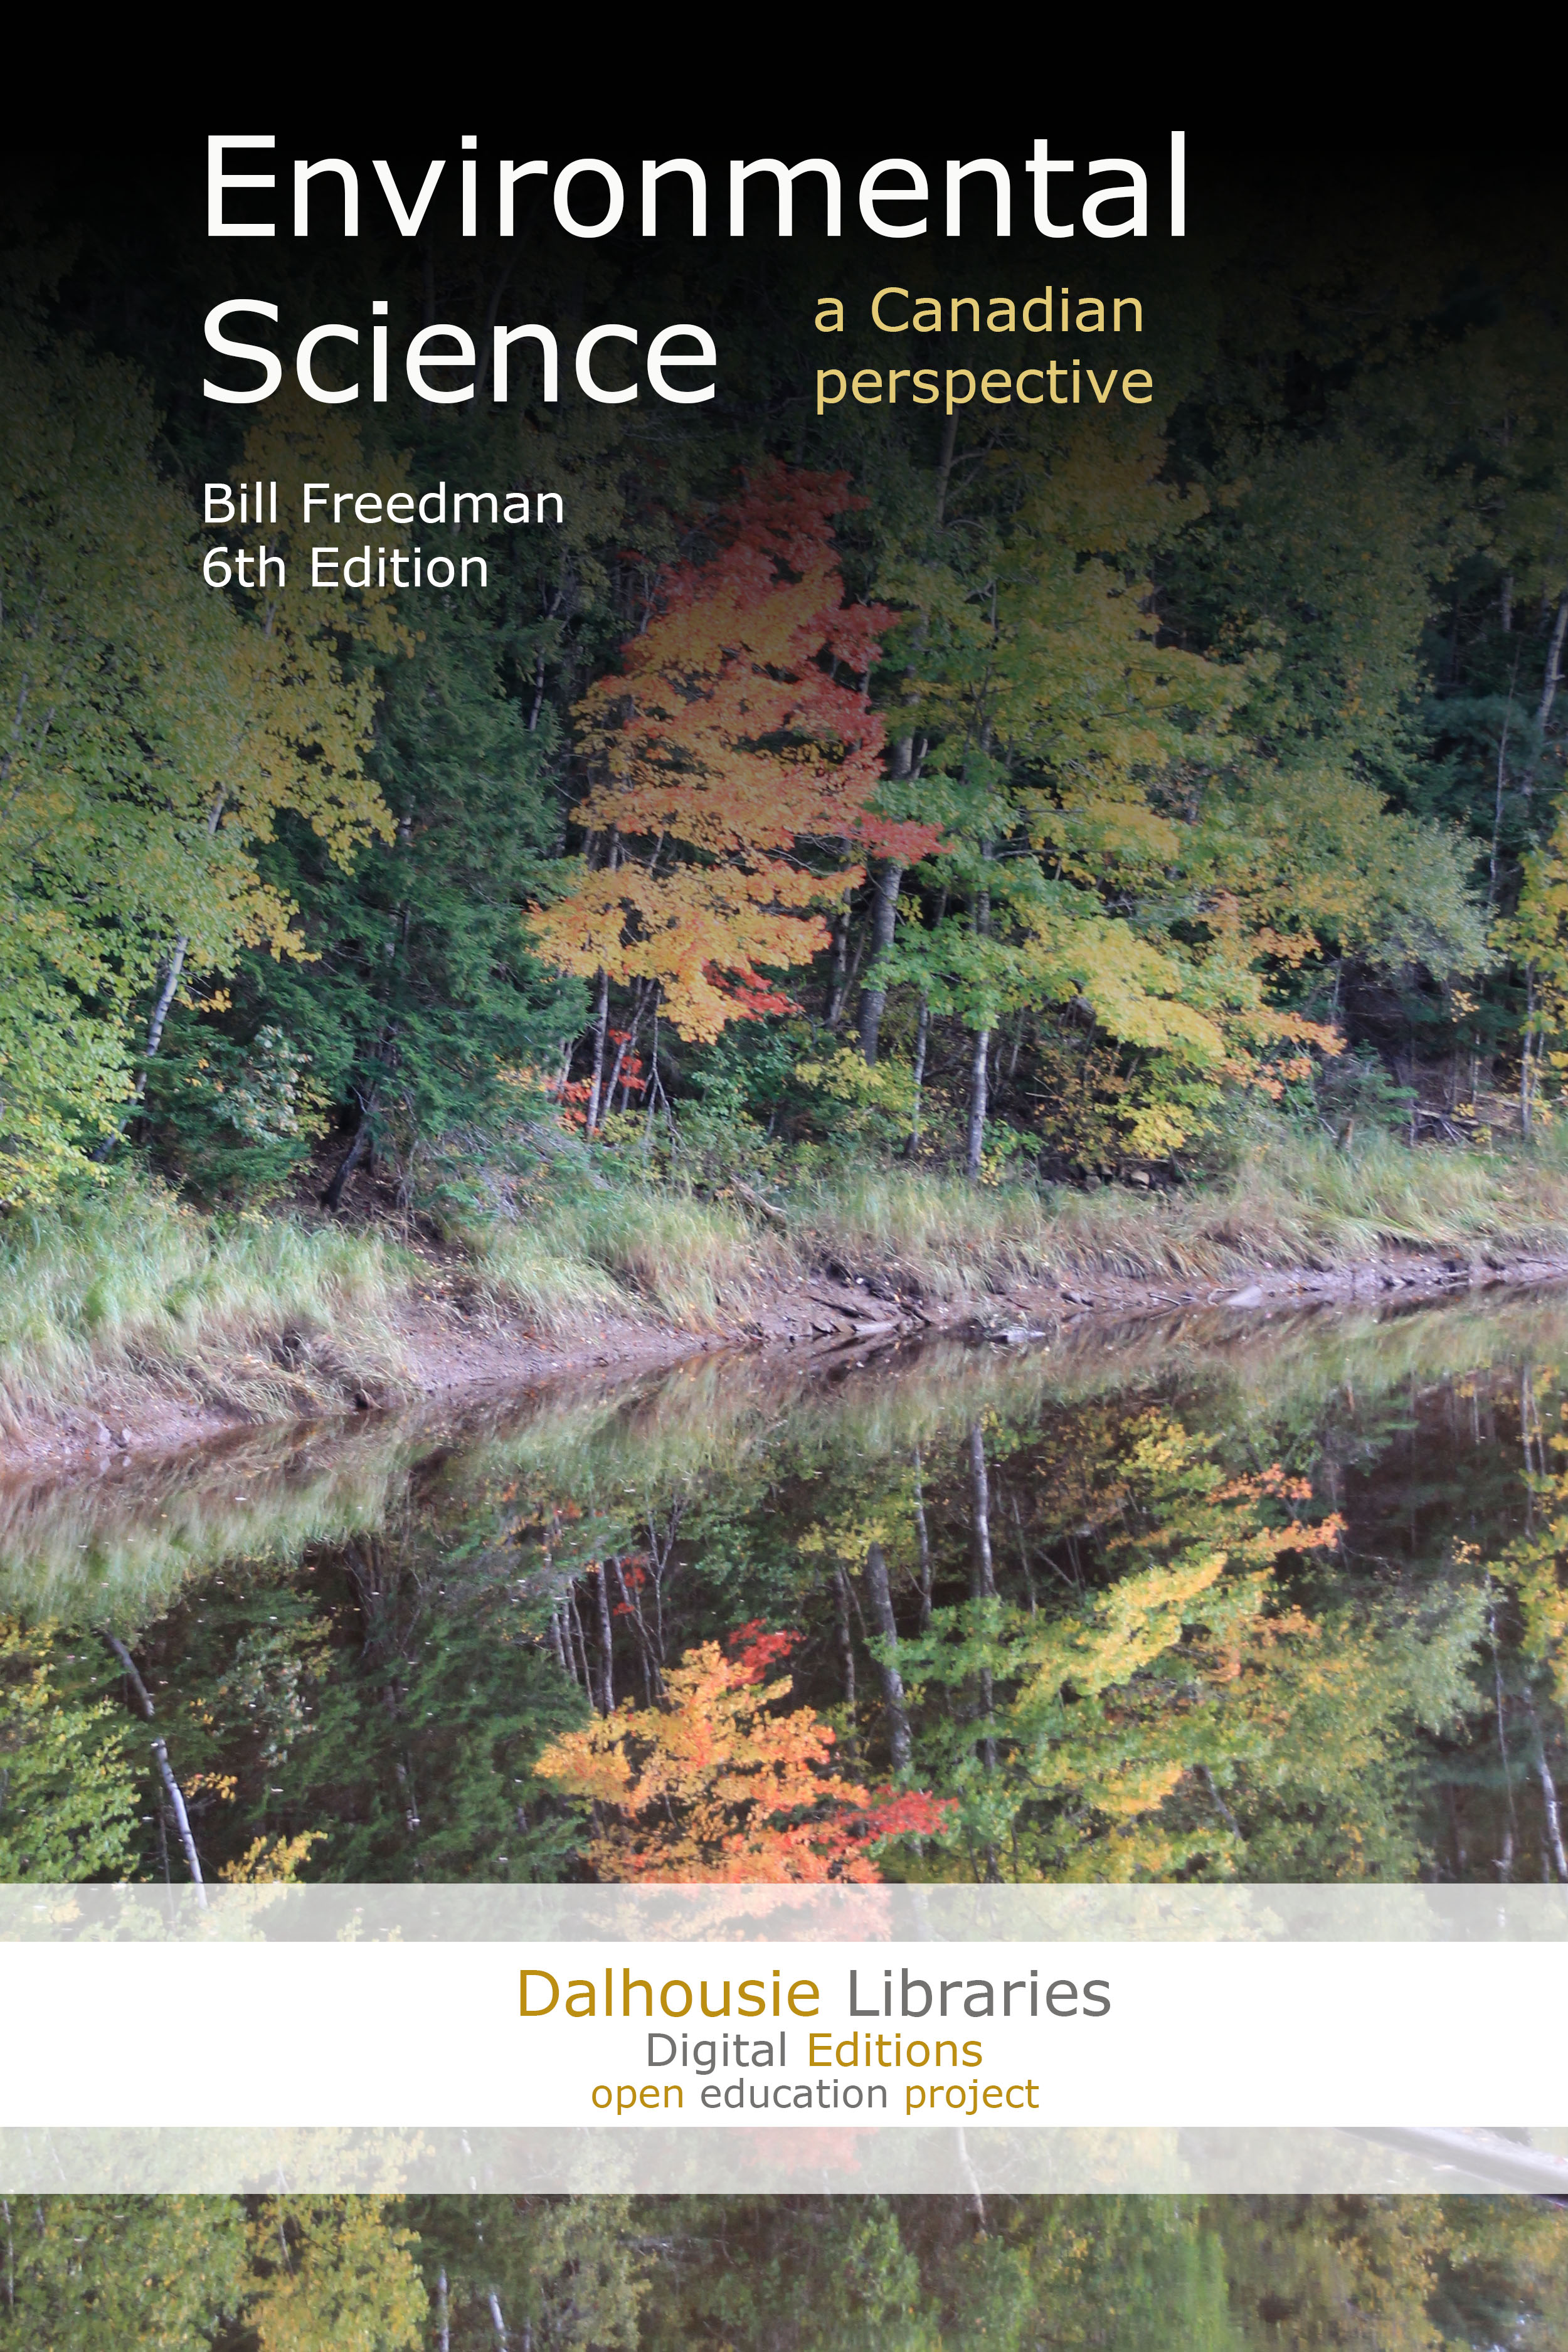 Cover image for Environmental Science